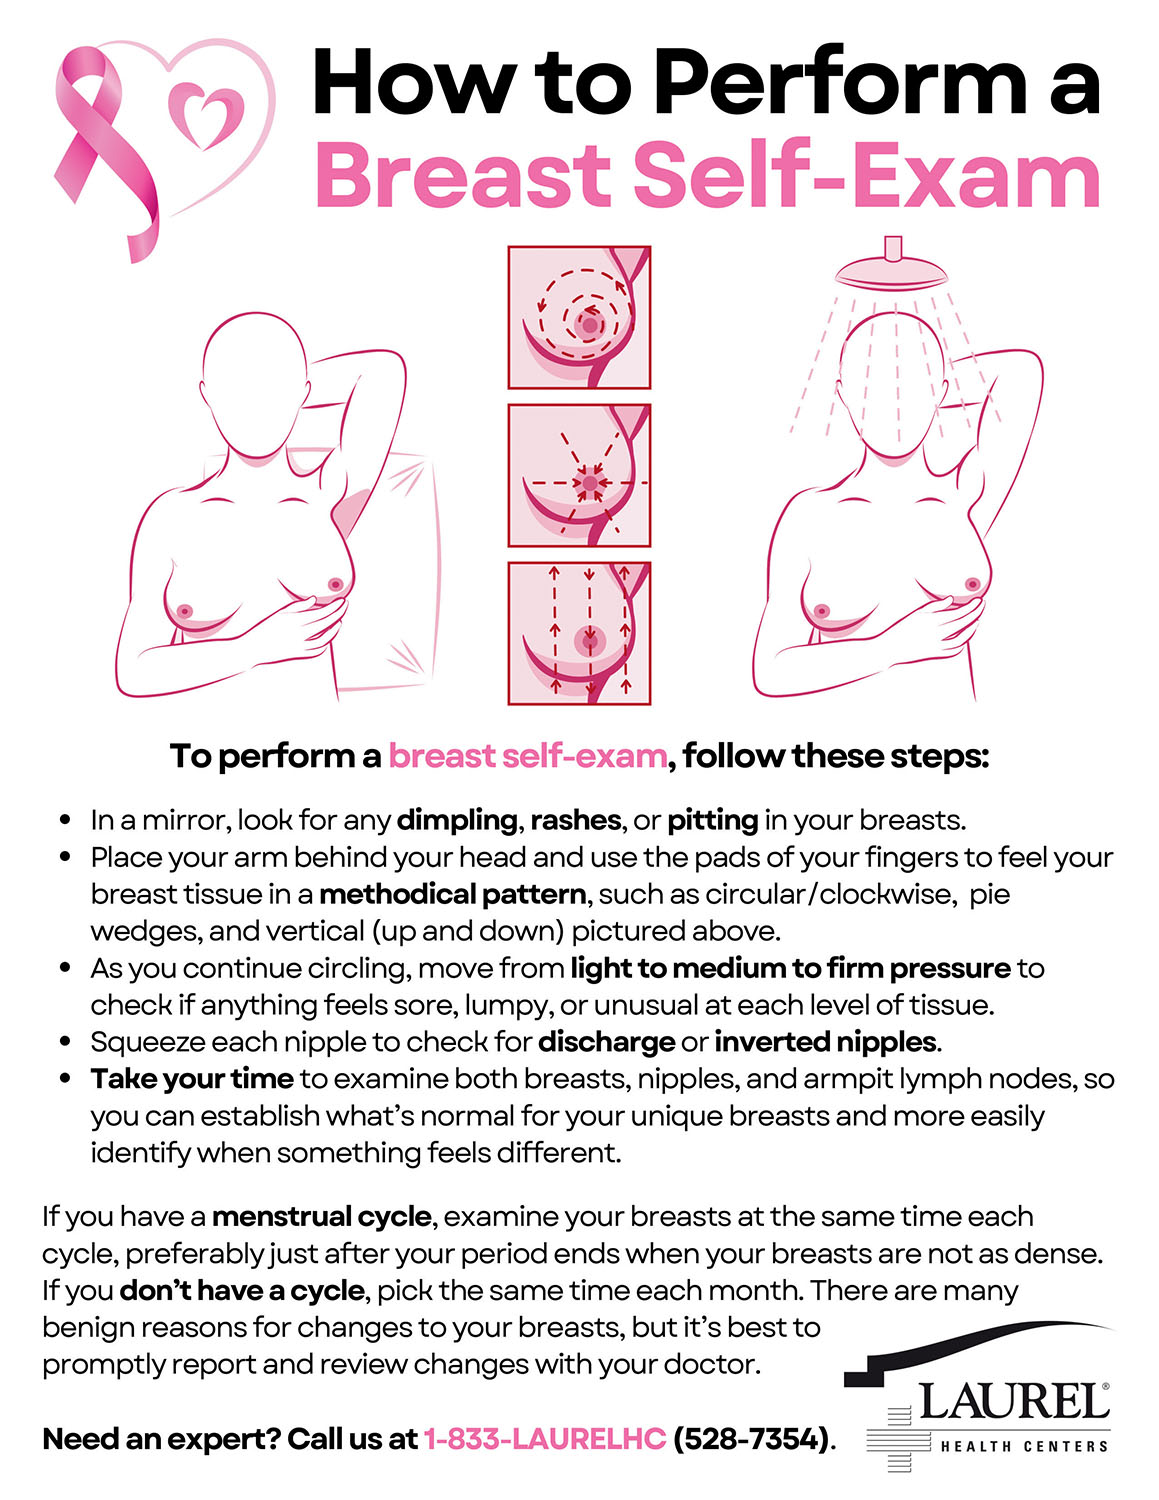 Laurel Health's Instructions for Completing a Breast Self-Exam with Infographic for Exam Technique